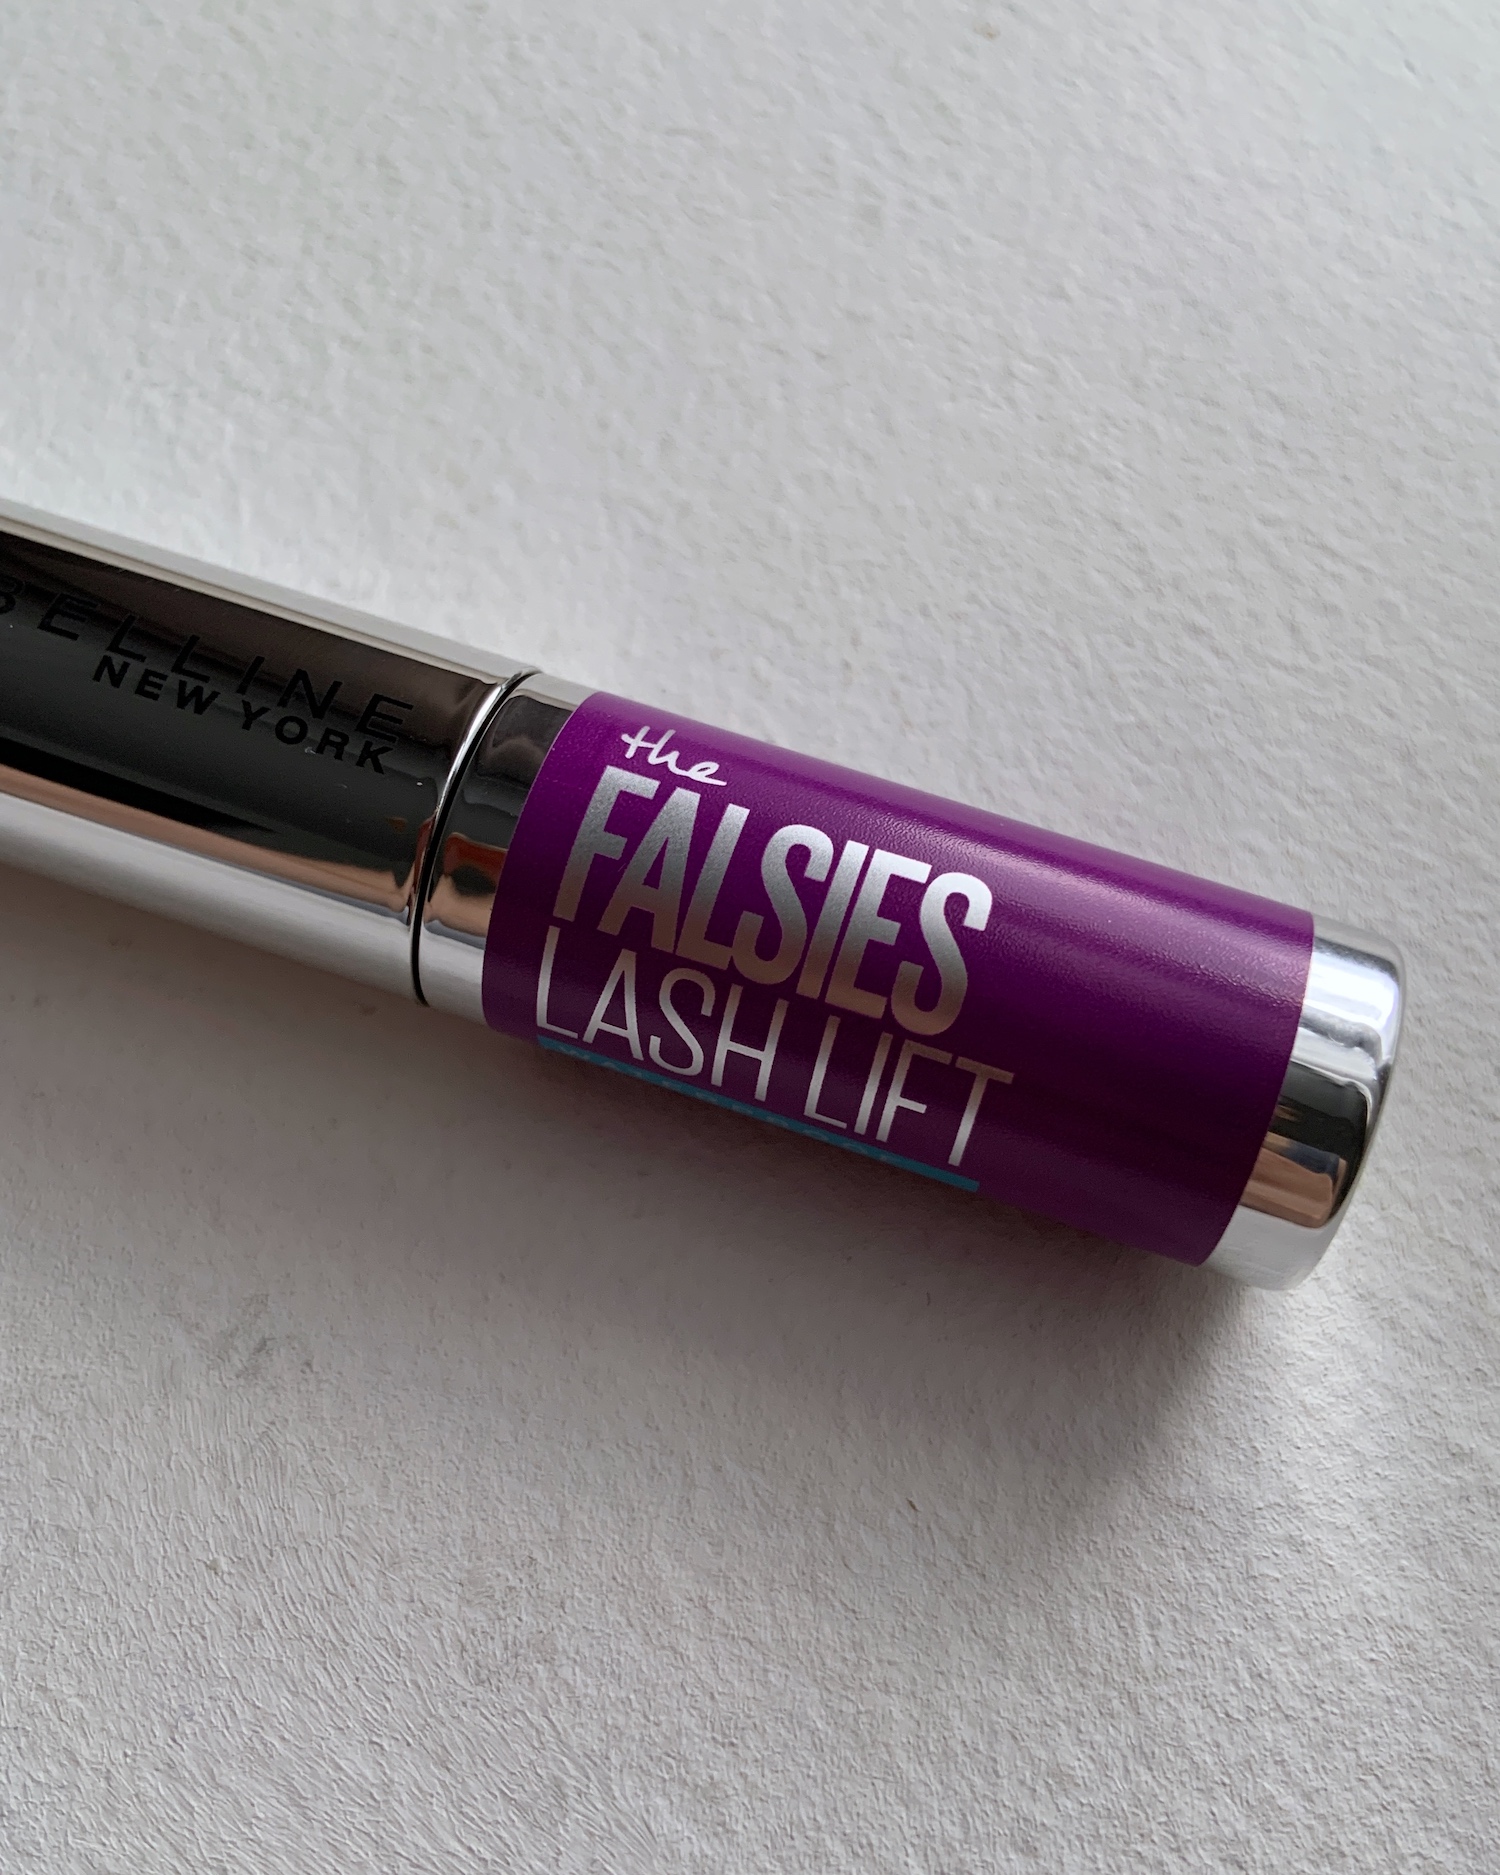 Lift The Falsies Lash After) Review: Mascara & (Before Maybelline